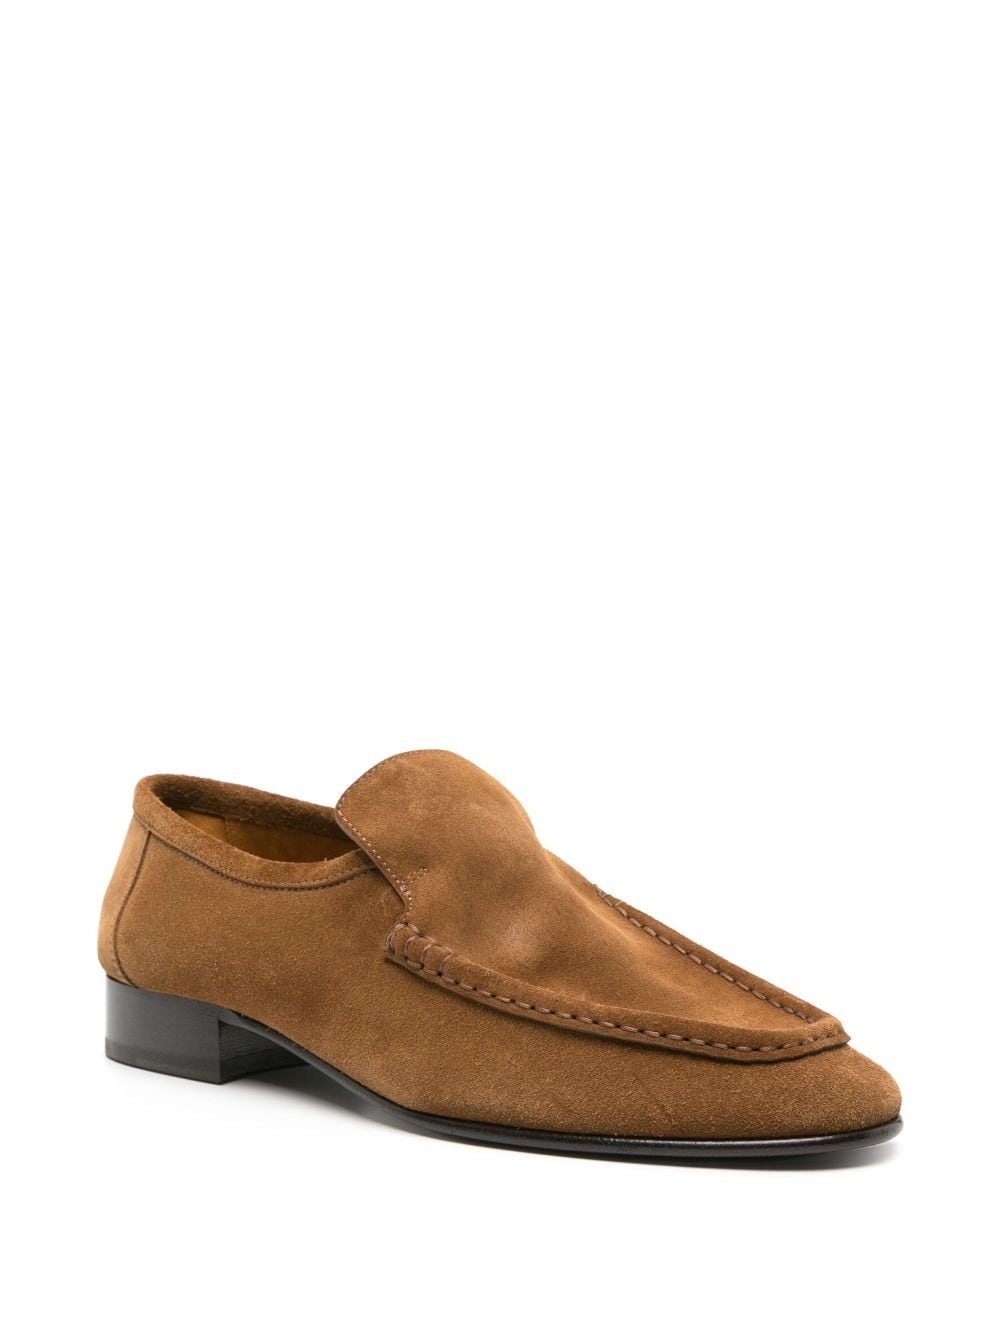 New Soft suede loafers - 2